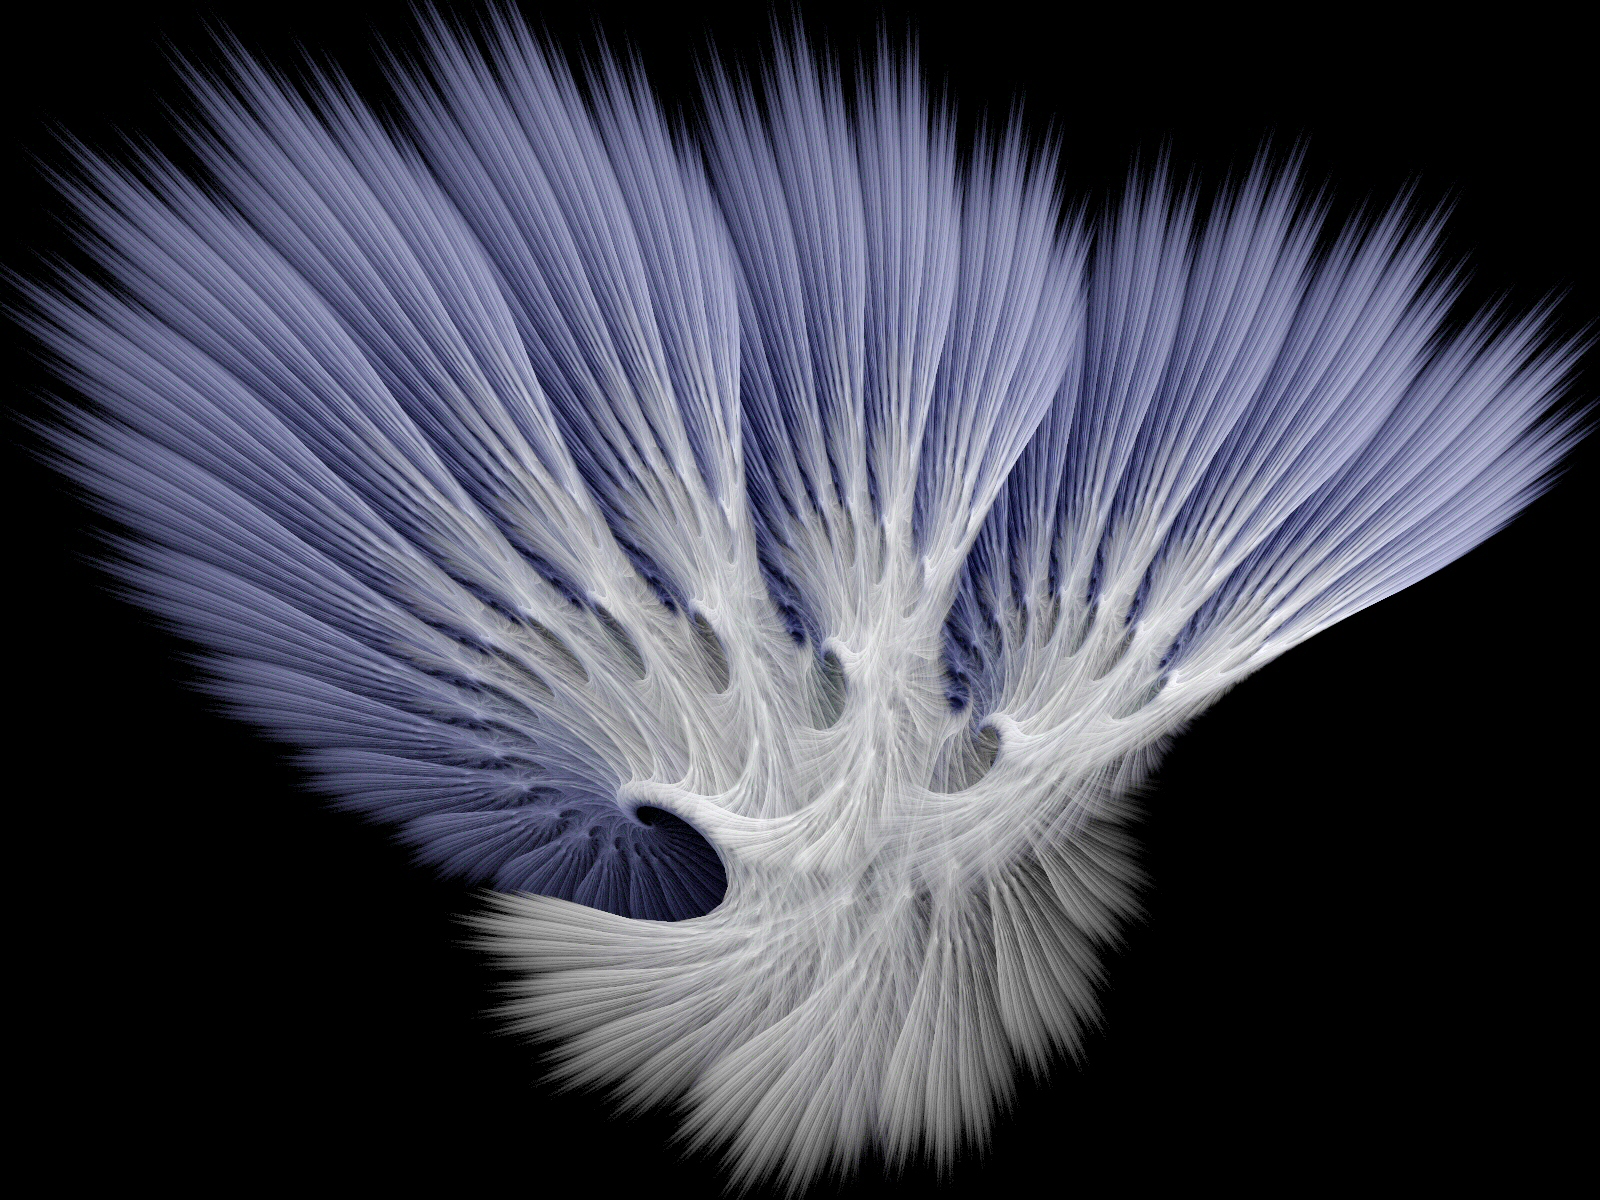 Soft_Lilac_Feathers_by_Thelma1.jpg